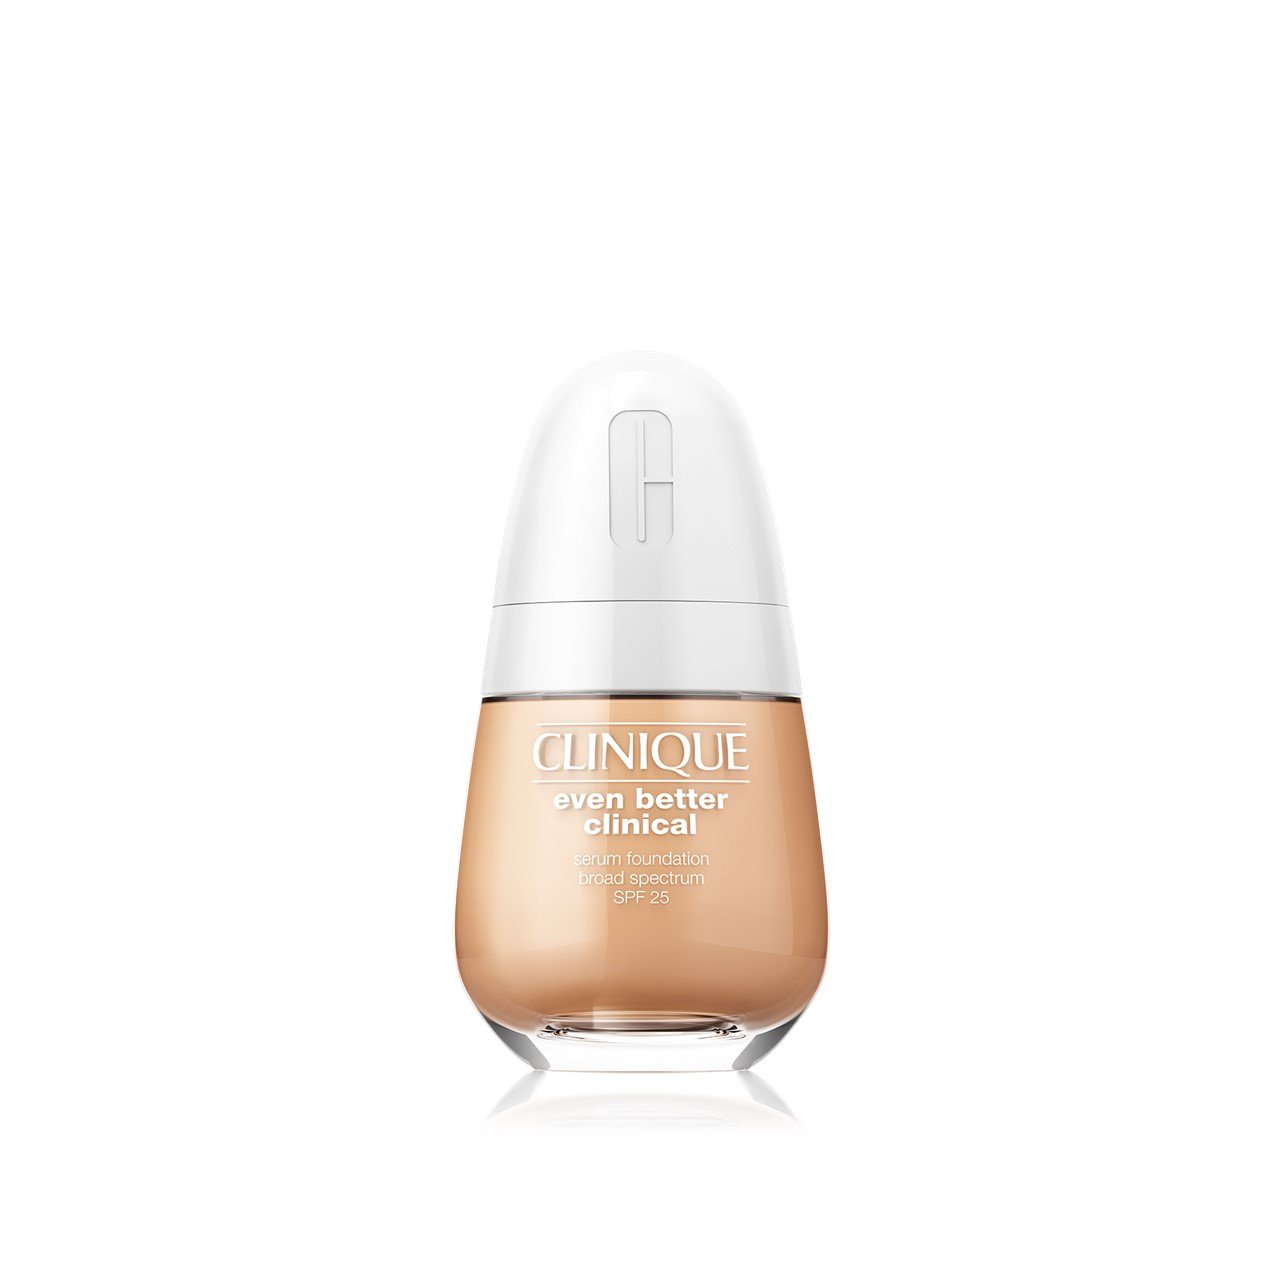 Clinique Even Better Clinical Serum Foundation SPF20 WN30 Biscuit 30ml (1 fl oz)